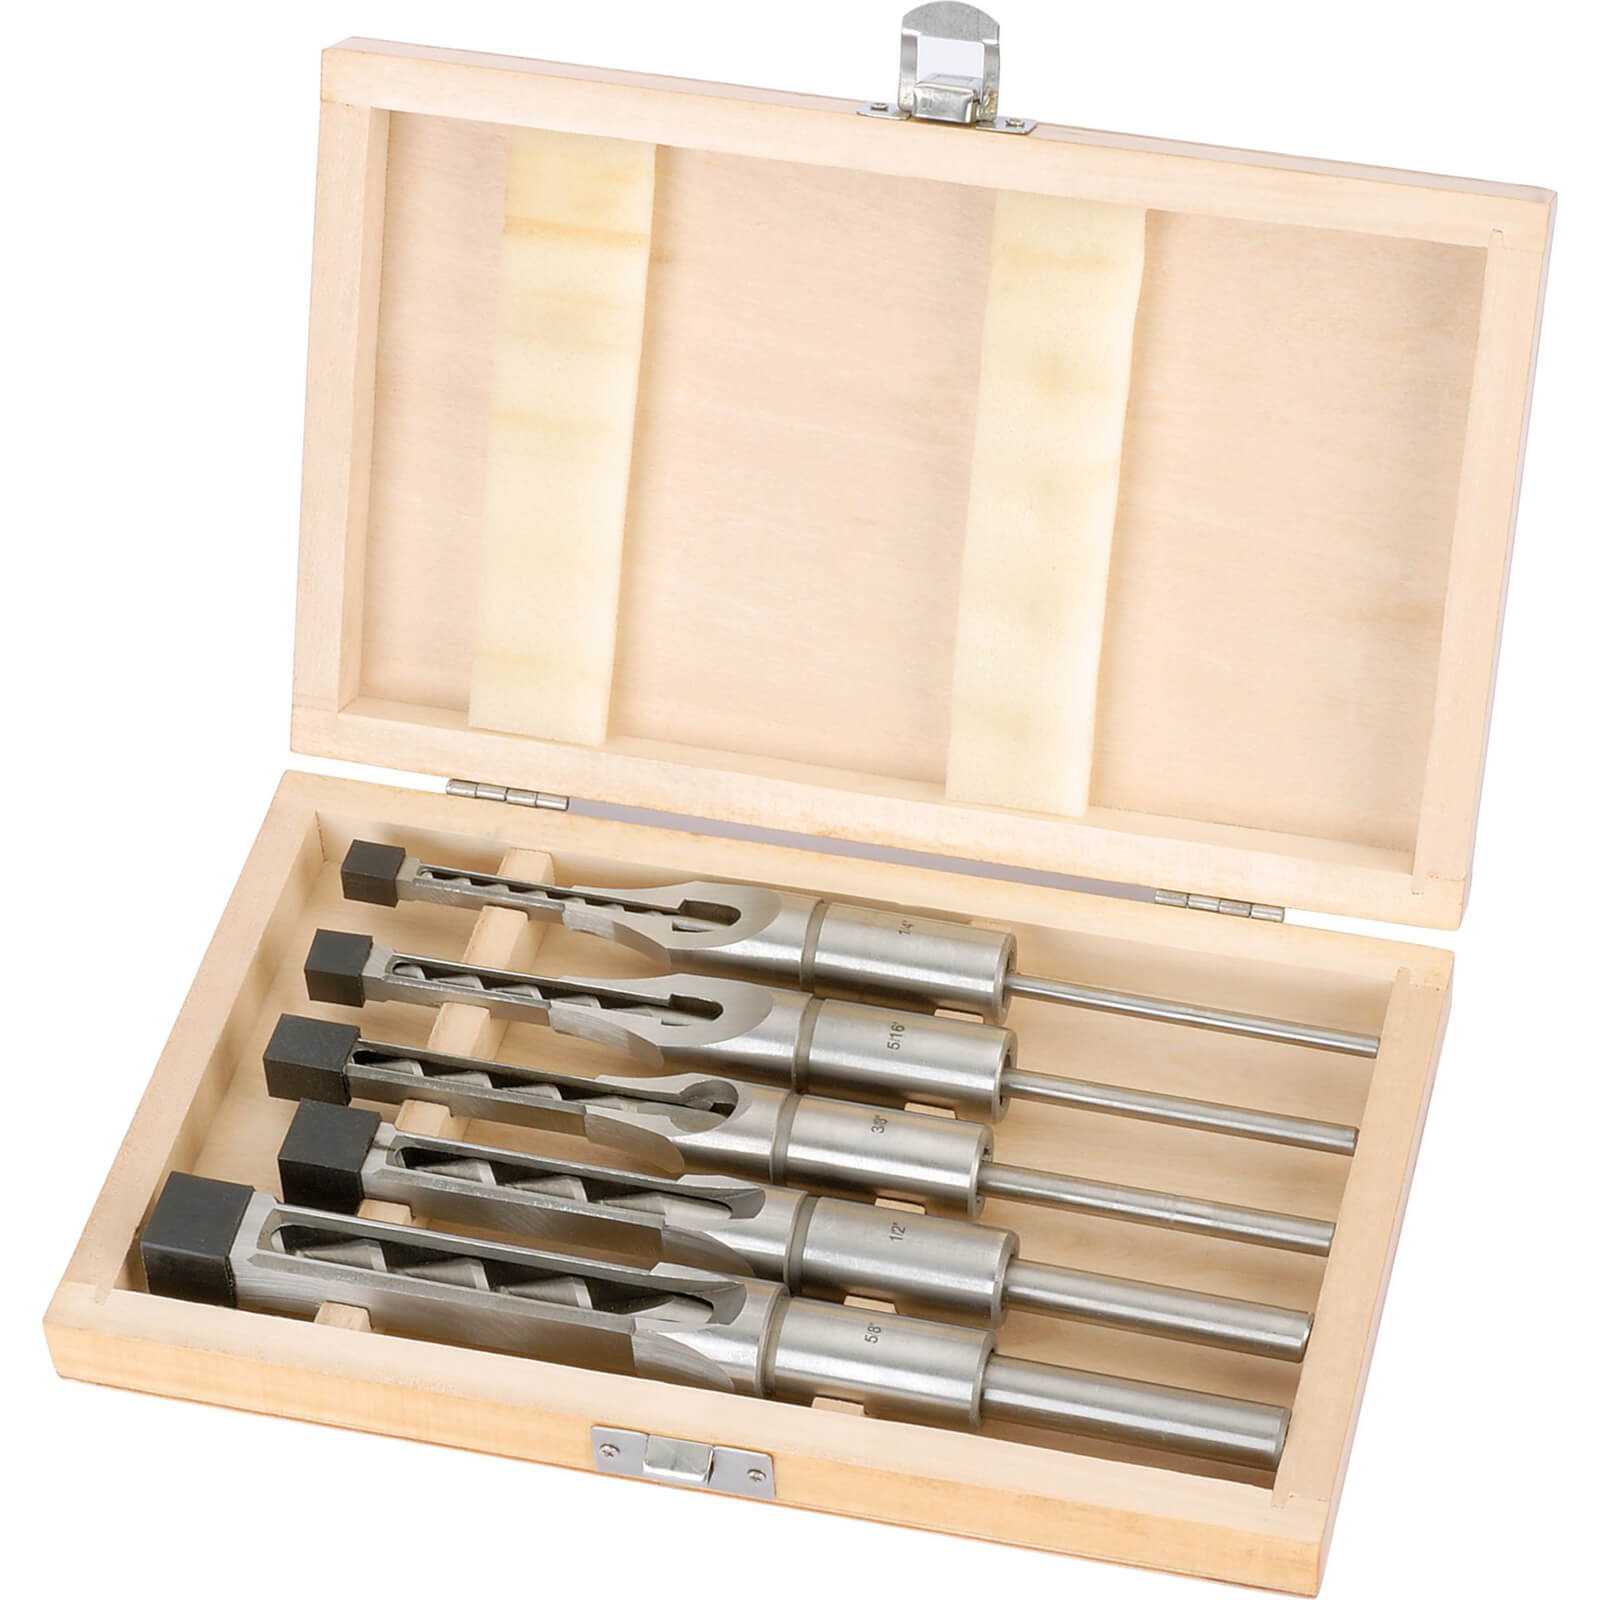 Image of Draper 5 Piece Hollow Square Mortice Chisel and Bit Set